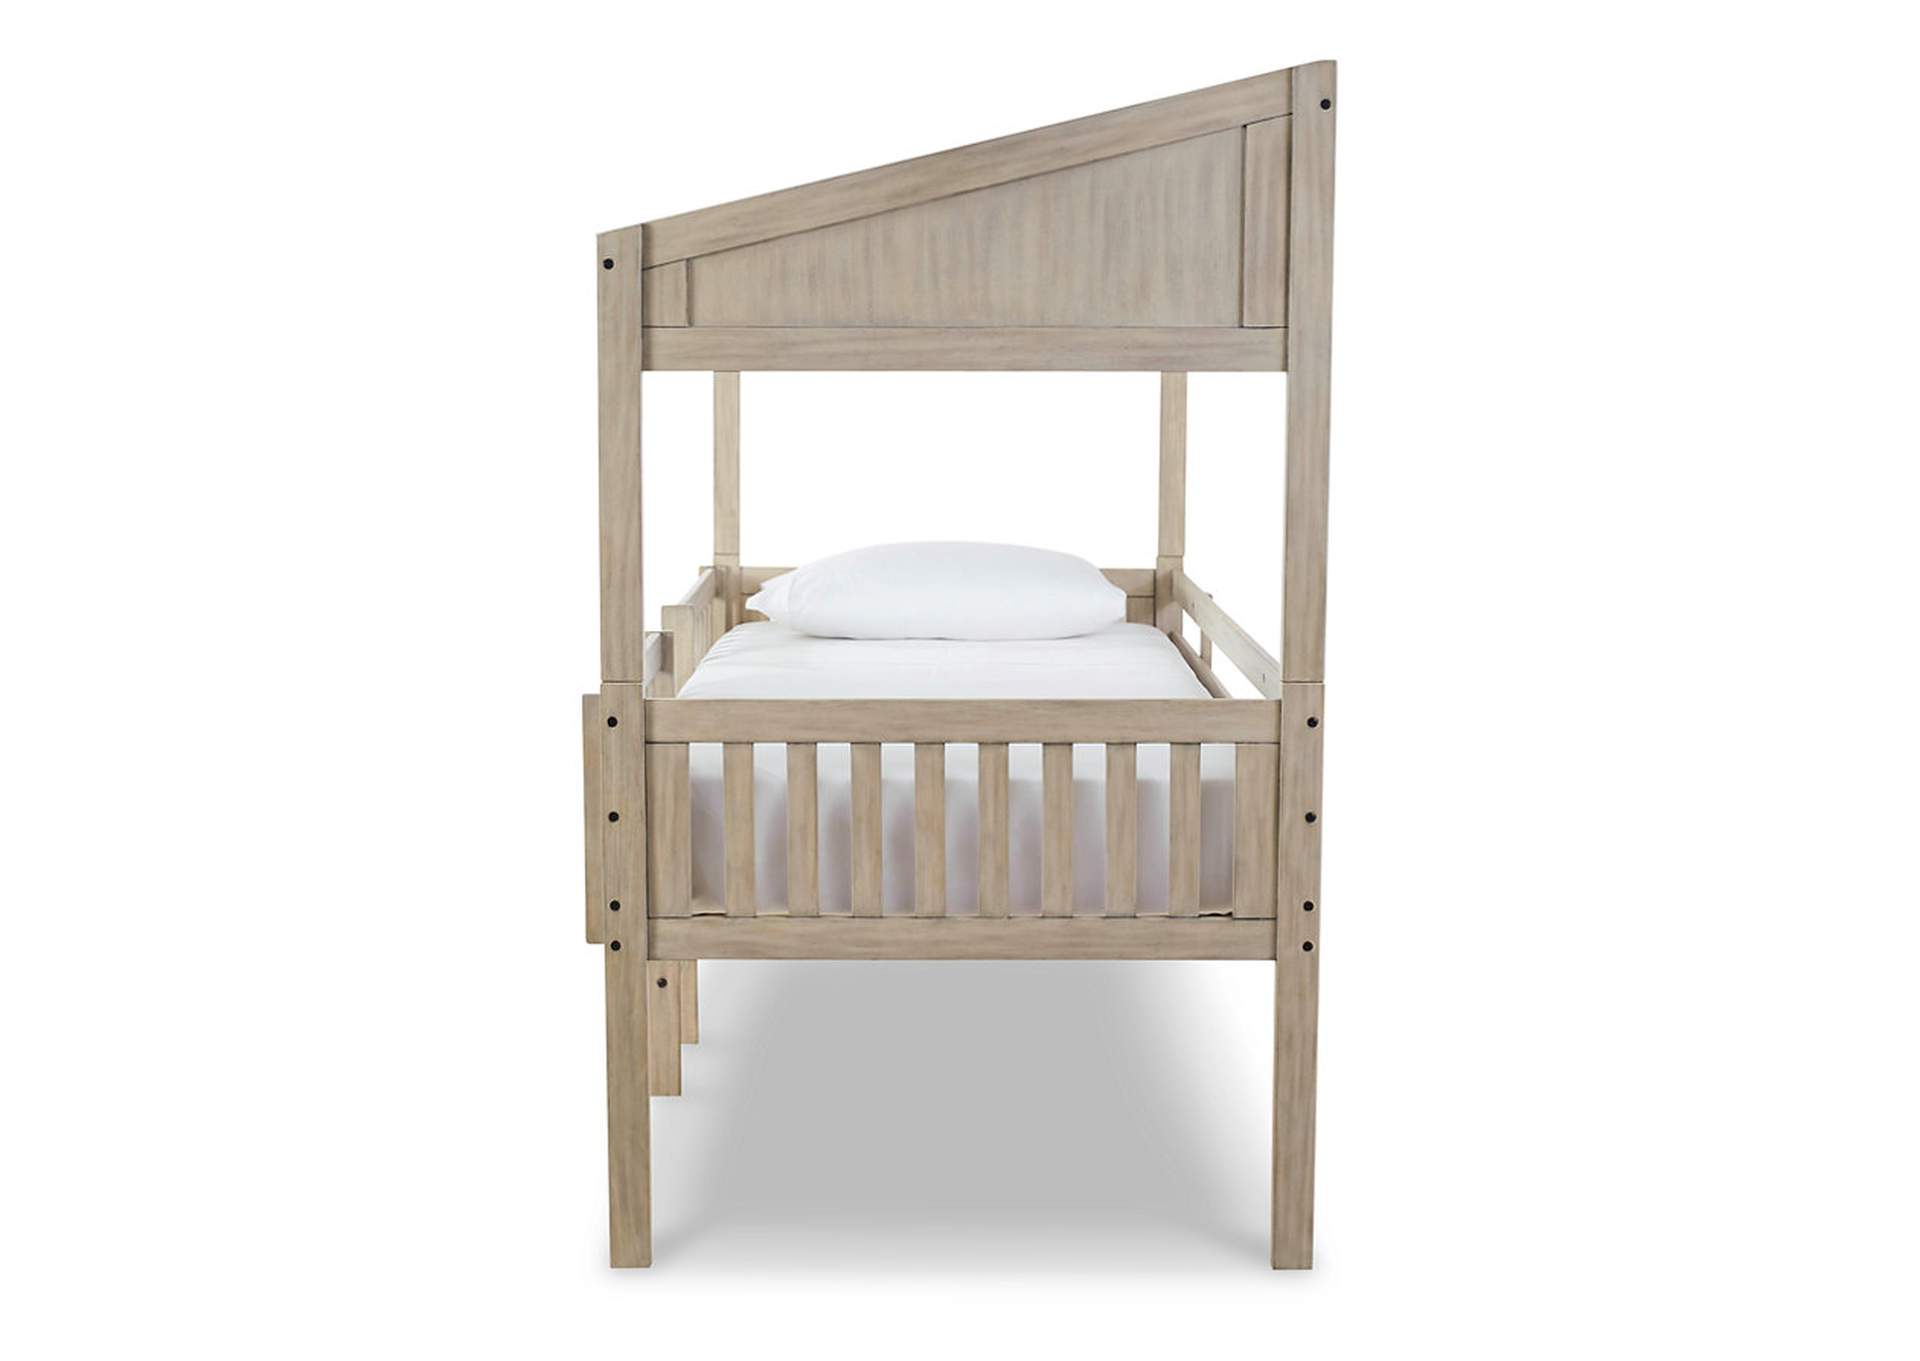 Wrenalyn Twin Loft Bed,Signature Design By Ashley